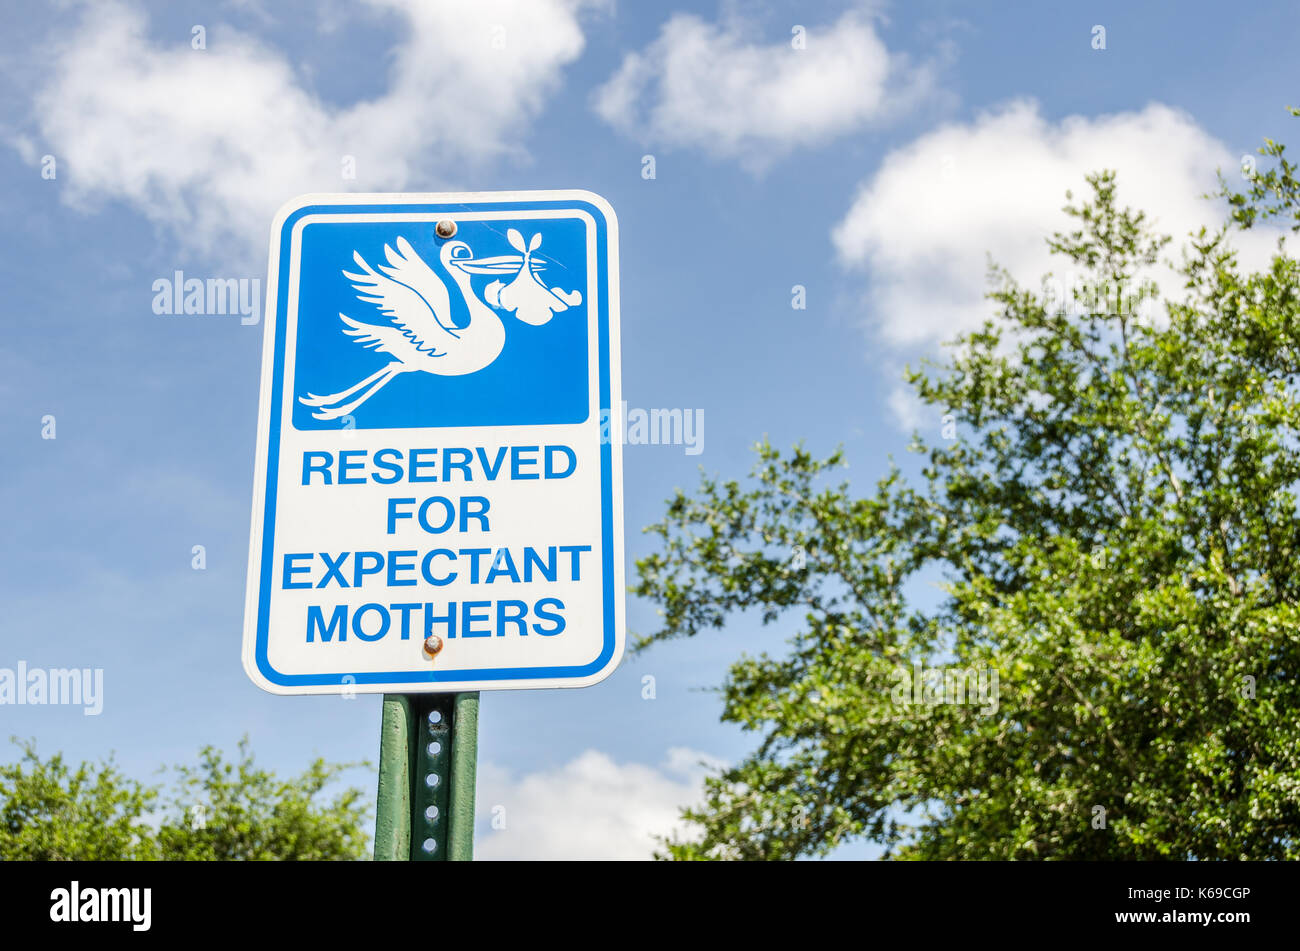 Sign for parking space reserved for expectant mothers or pregnant women Stock Photo